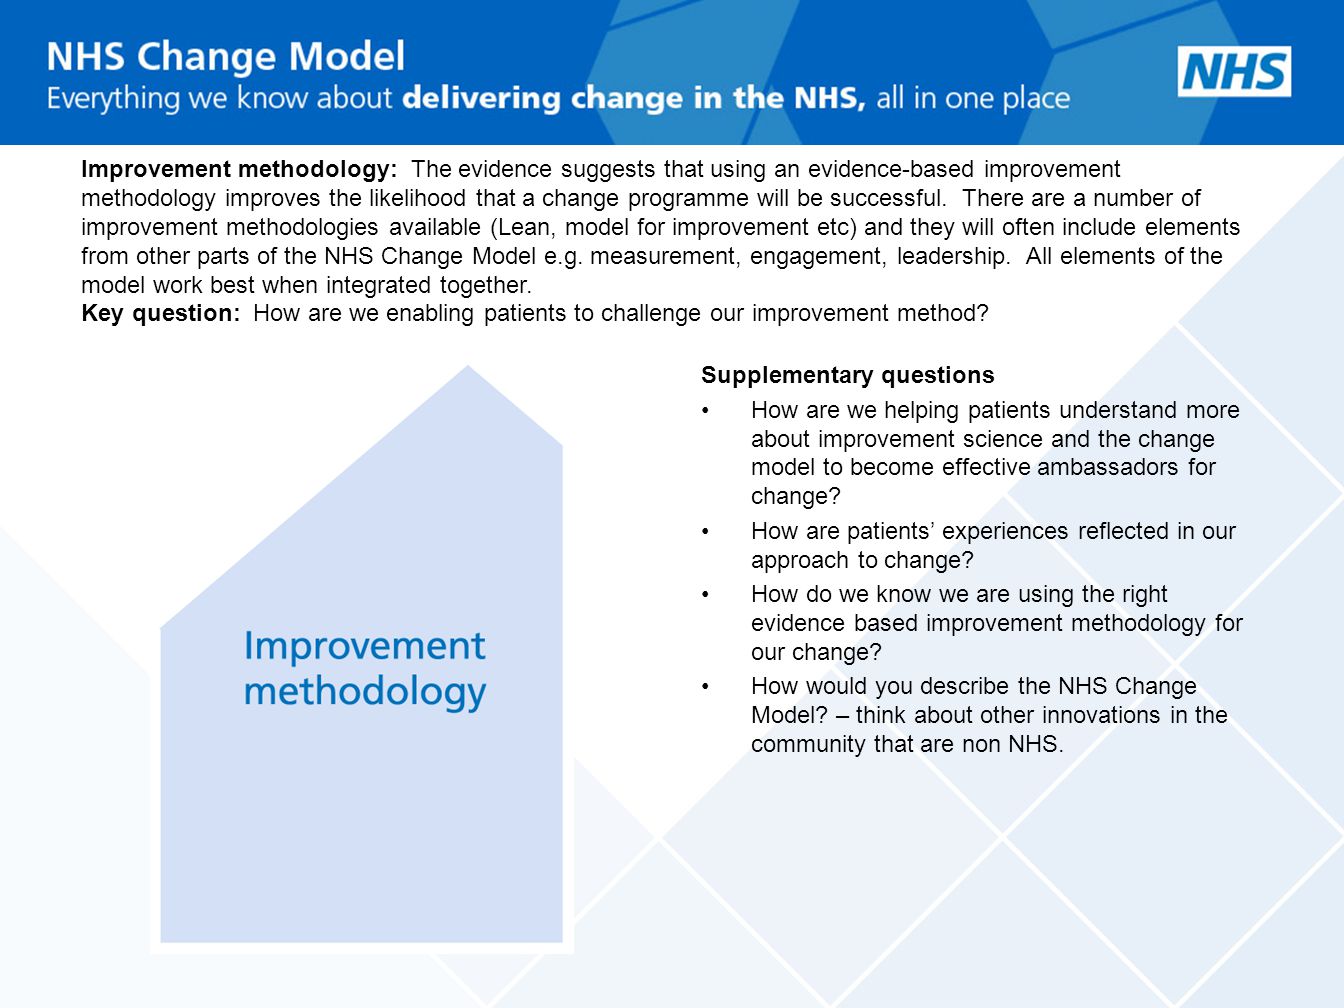 Improvement methodology: The evidence suggests that using an evidence-based improvement methodology improves the likelihood that a change programme will be successful. There are a number of improvement methodologies available (Lean, model for improvement etc) and they will often include elements from other parts of the NHS Change Model e.g. measurement, engagement, leadership. All elements of the model work best when integrated together. Key question: How are we enabling patients to challenge our improvement method